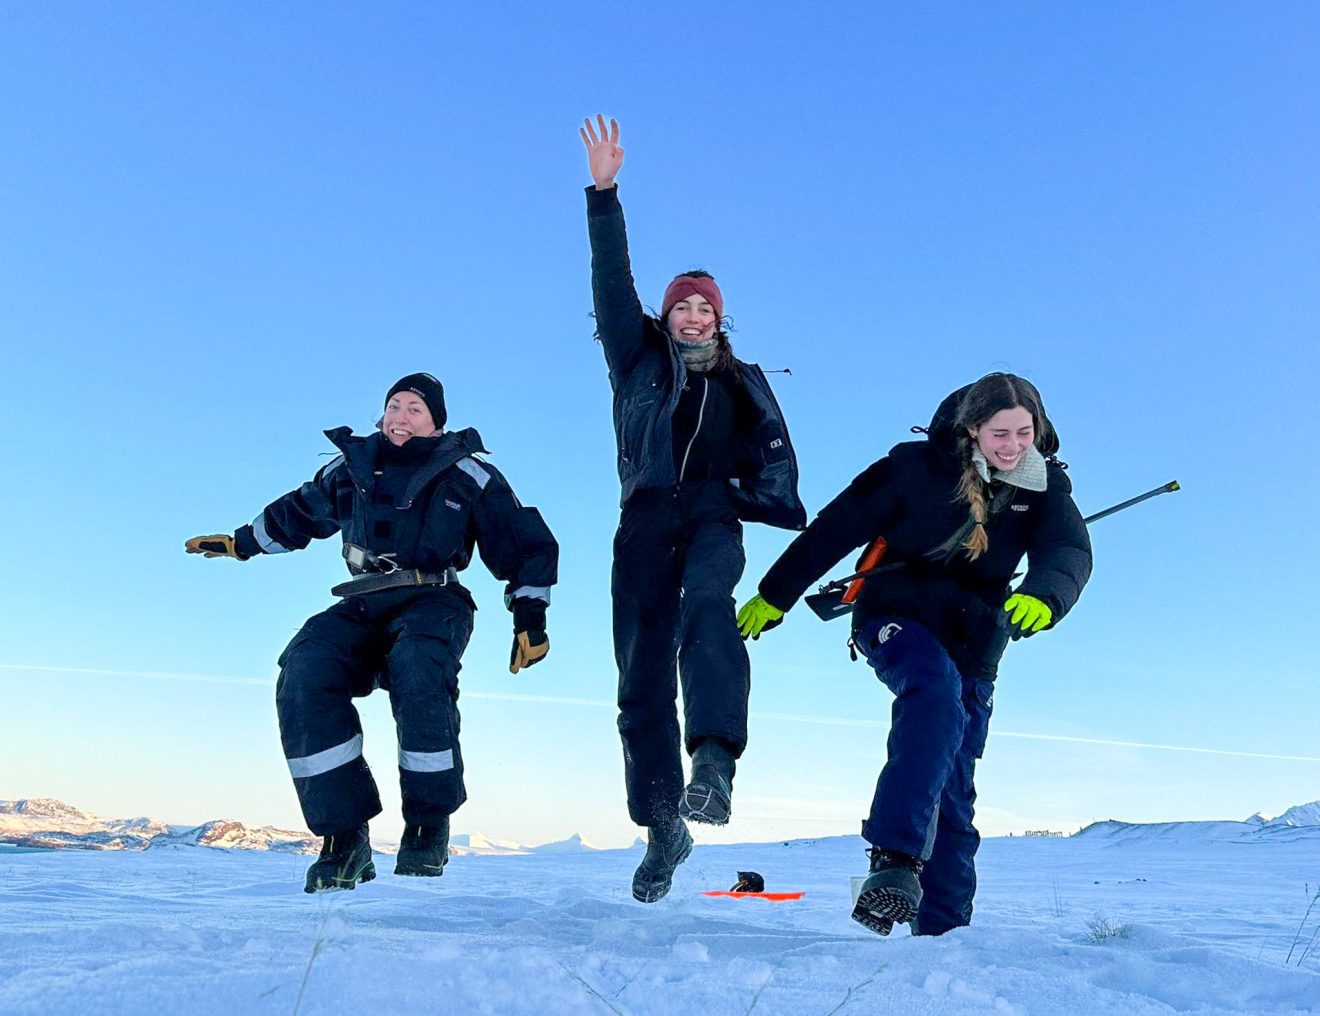 Snow sampling brings institutions together in Ny-Ålesund Research Station